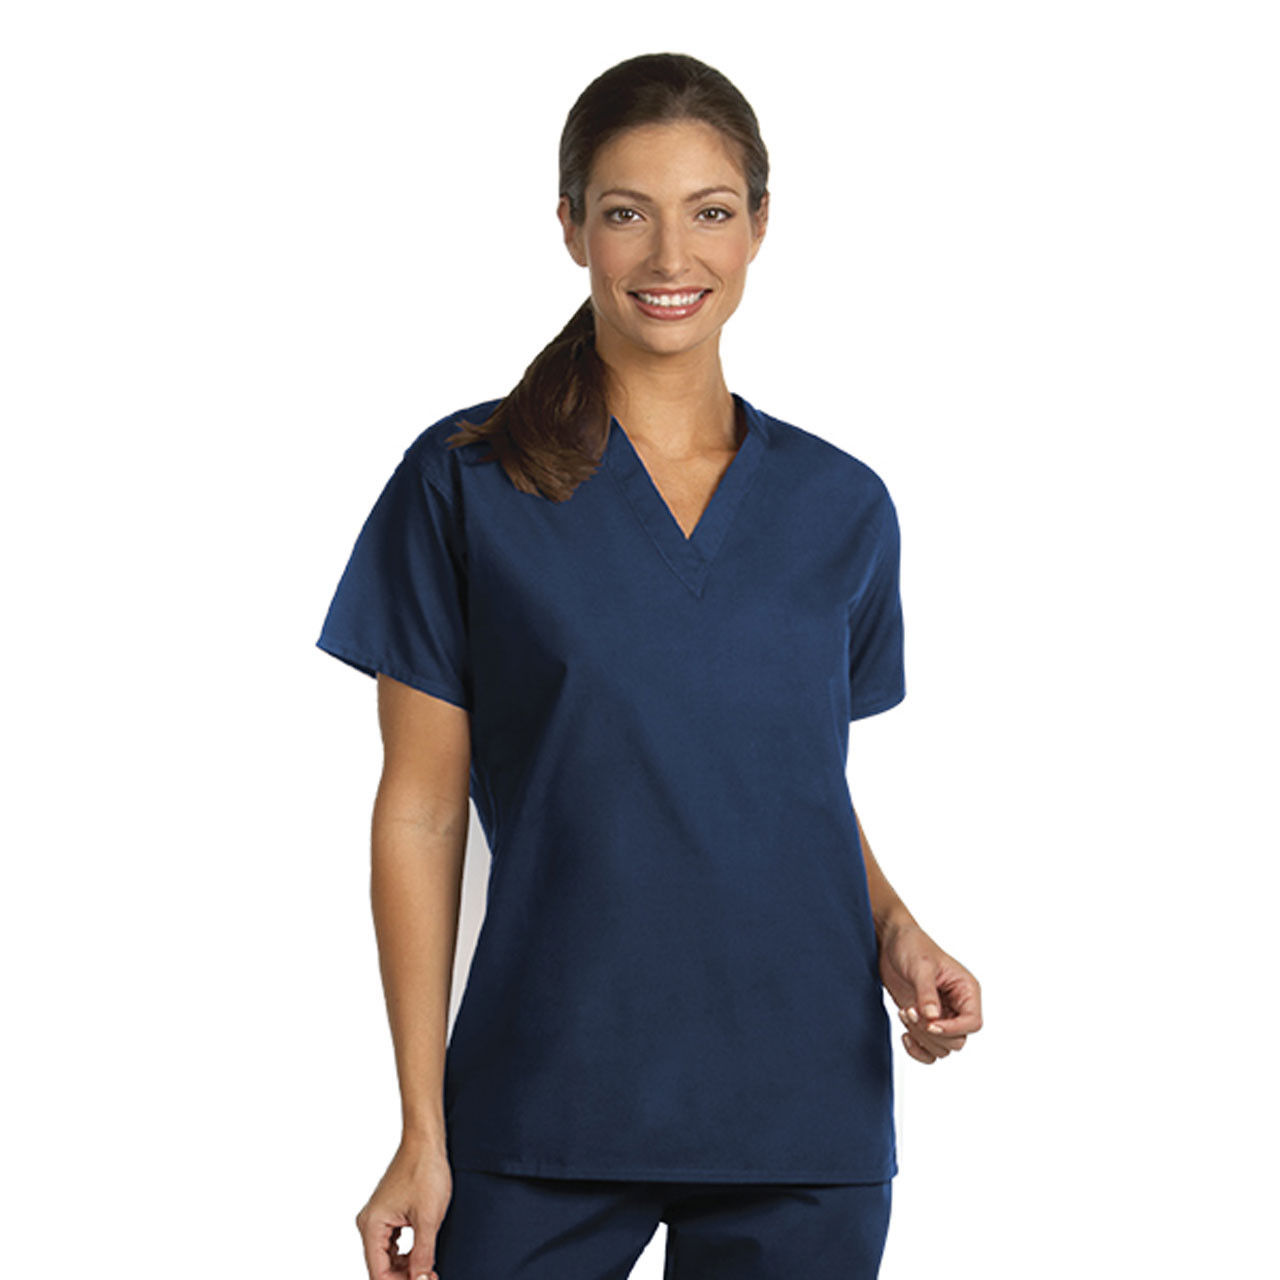 Which facilities would find blue nurse scrubs suitable?